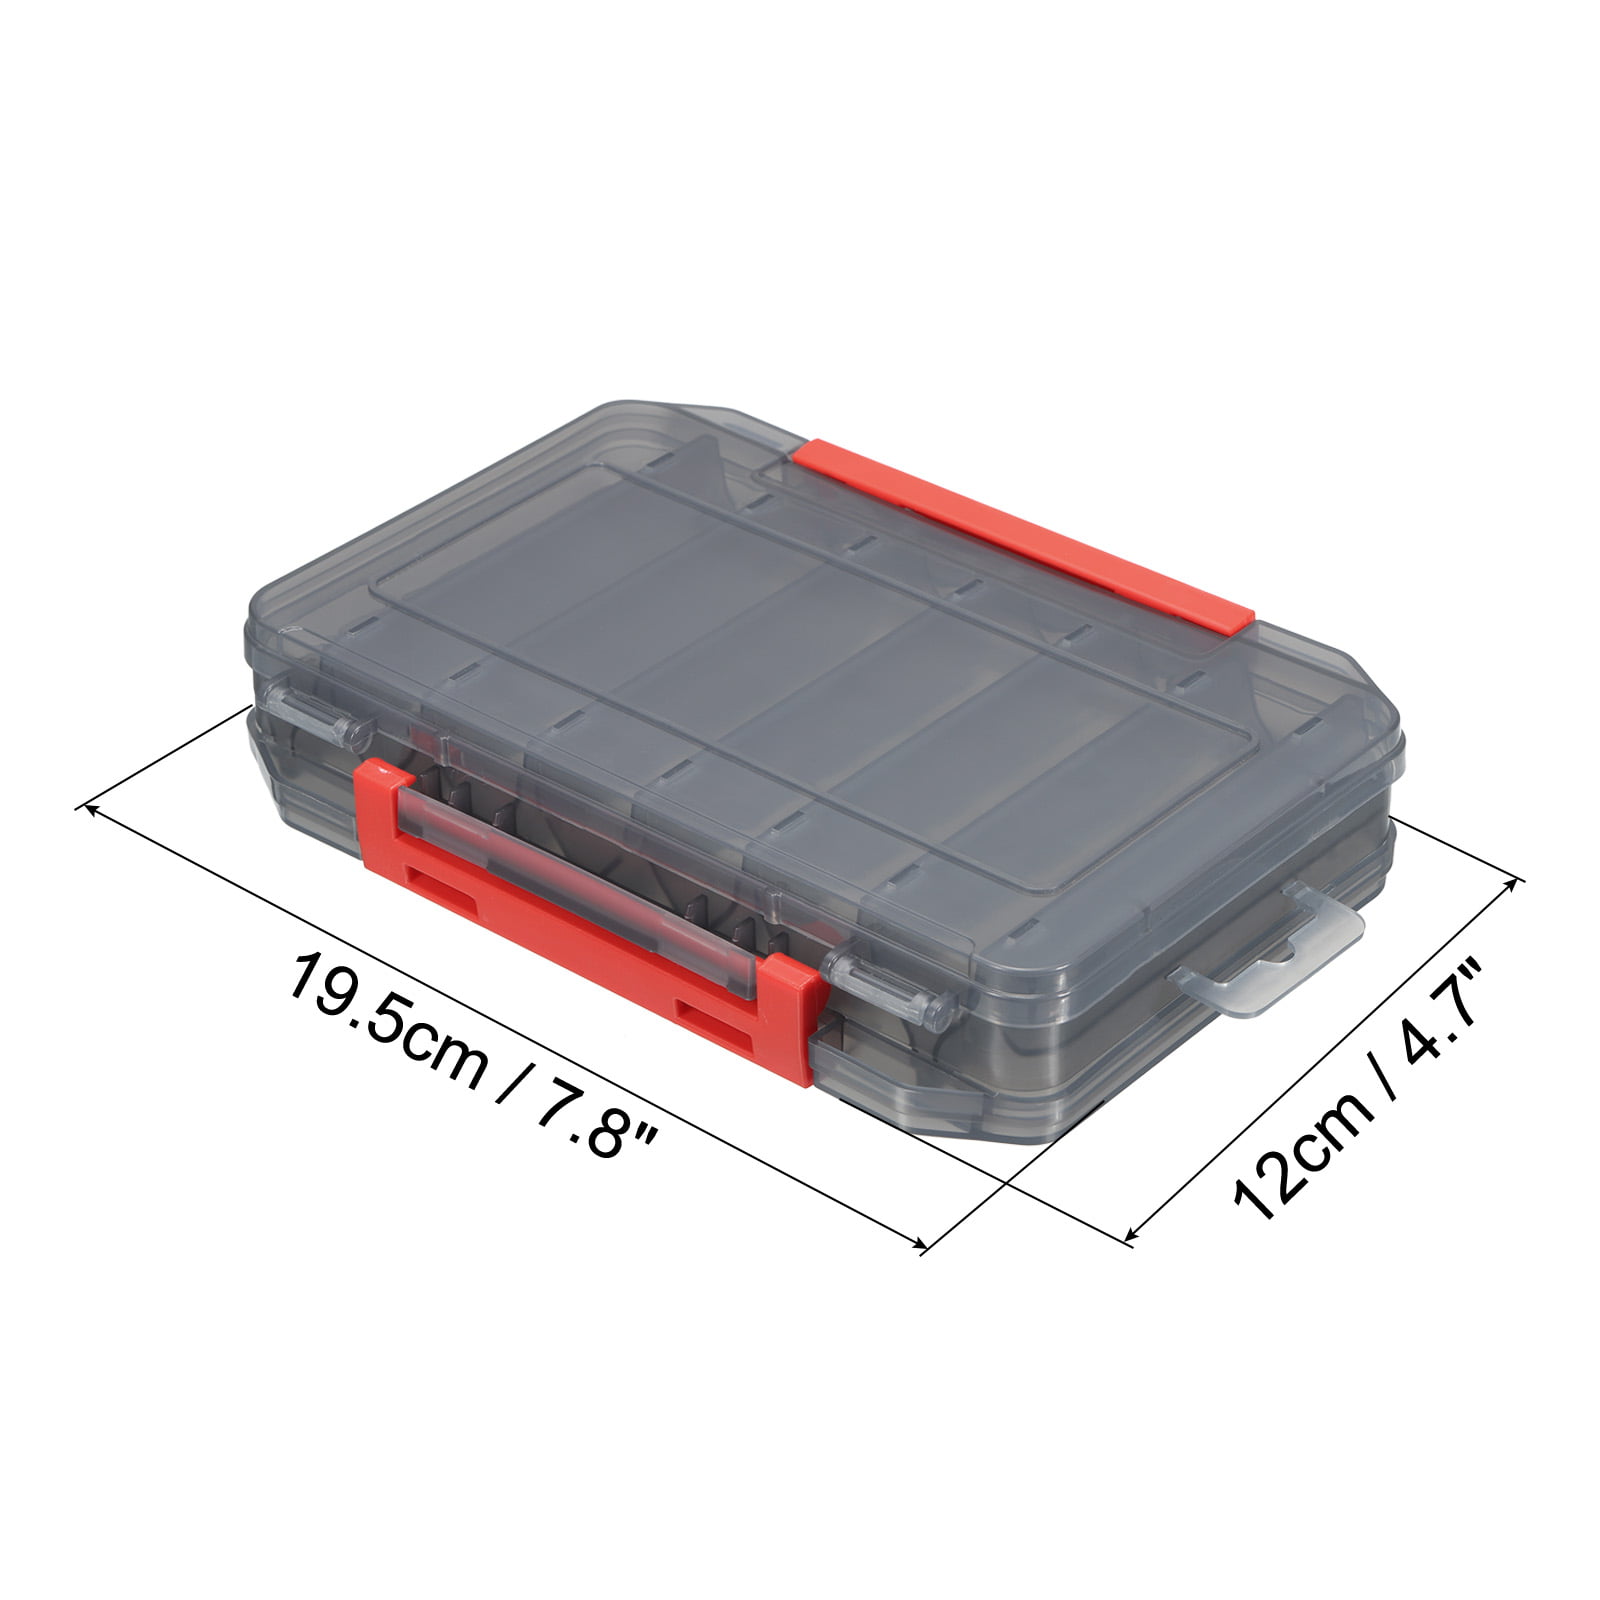 Two Sided Fishing Lure Storage Box Fish Tackle 14 Grids Container